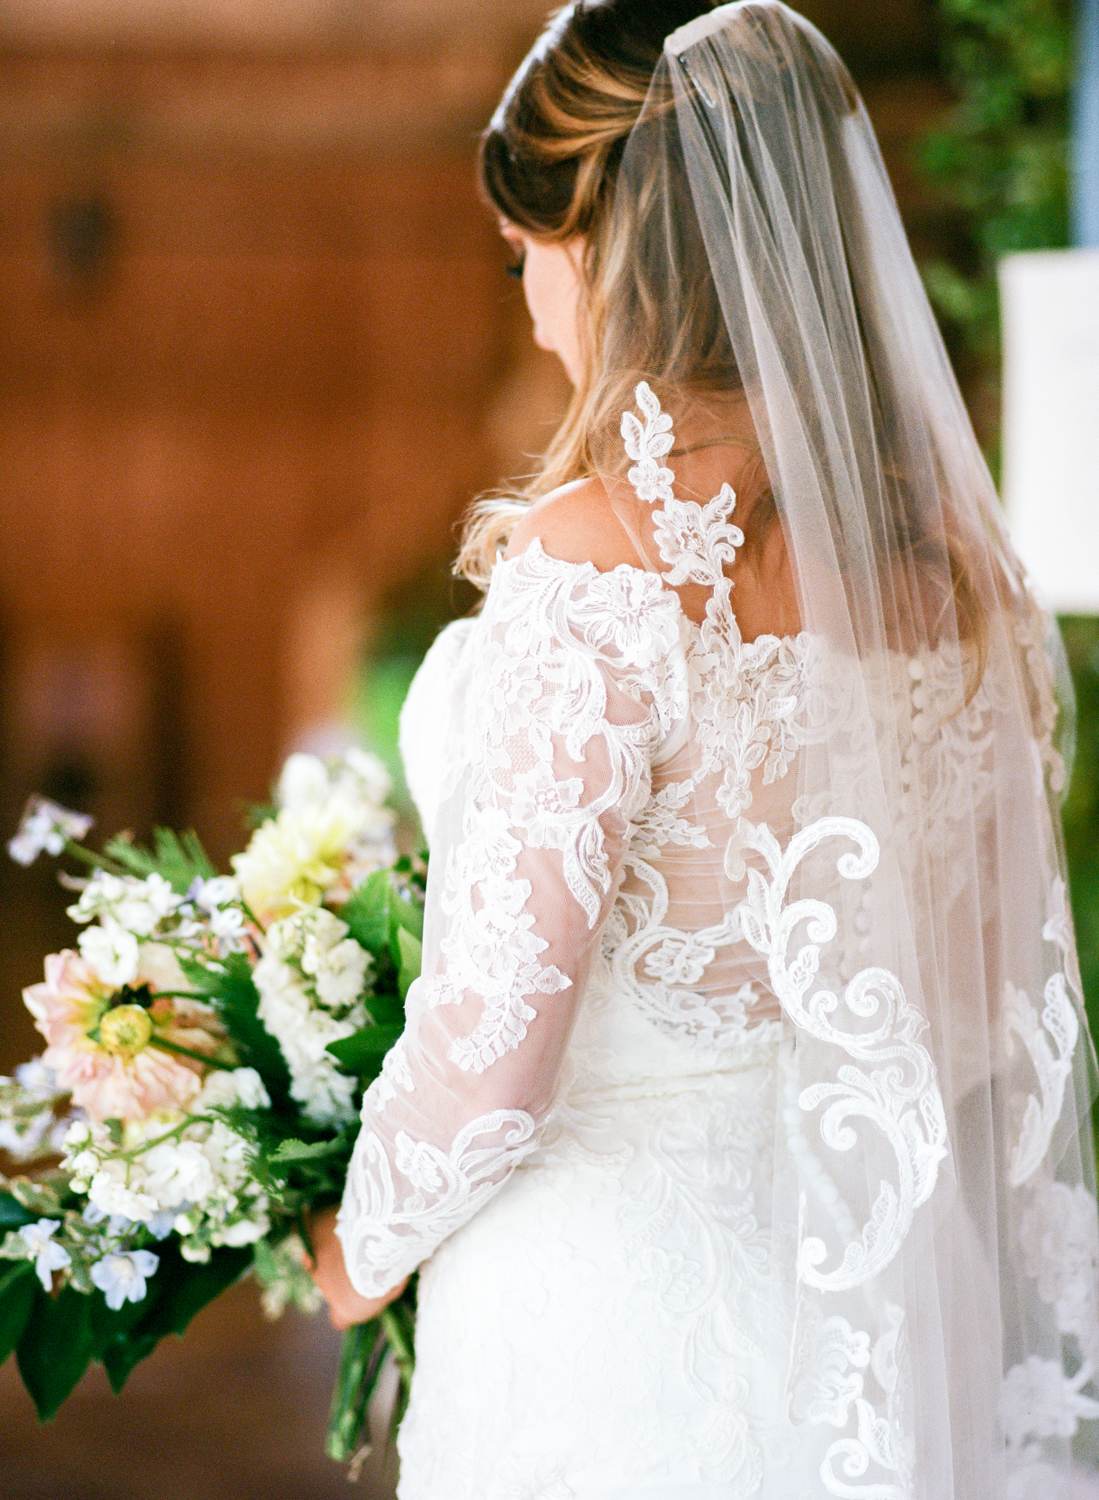 Bride wearing lace gown and veil, St. Louis Fine Art Film Wedding Photographer, Erica Robnett Photography